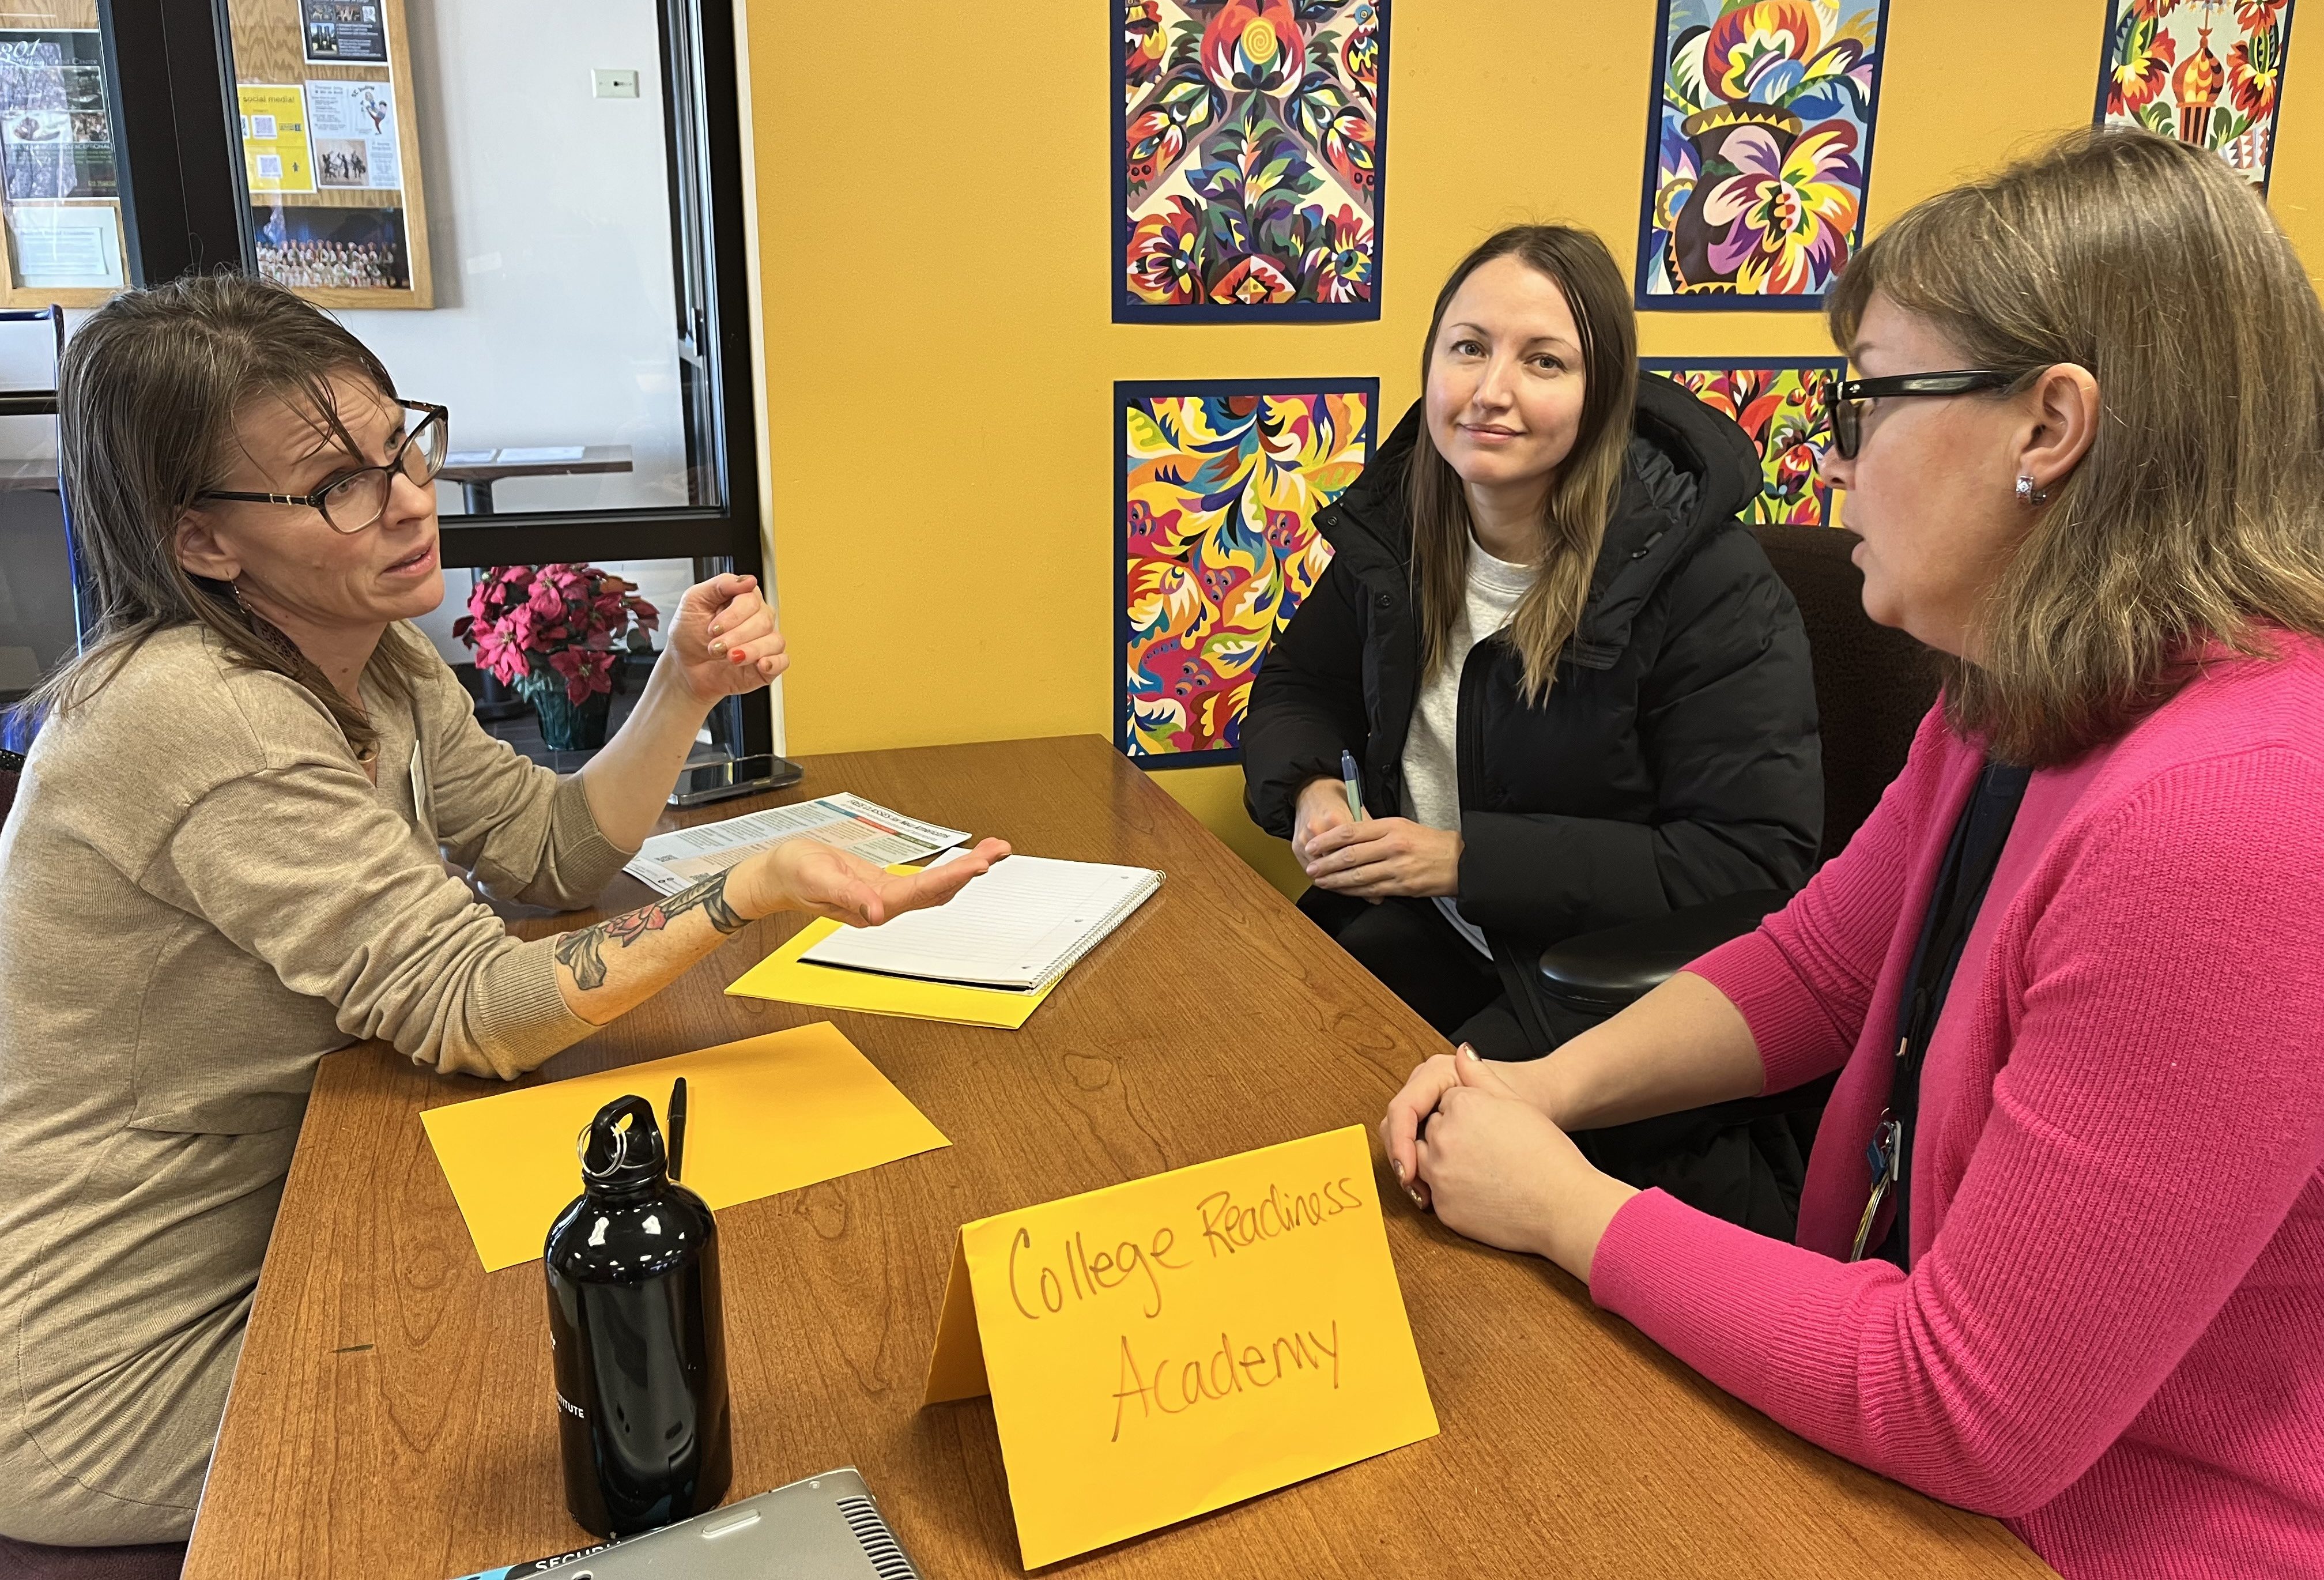 Elizabeth Fontaine, College Readiness Academy Program Manager, speaking with Ukrainians at the Ukrainian American Community Center.